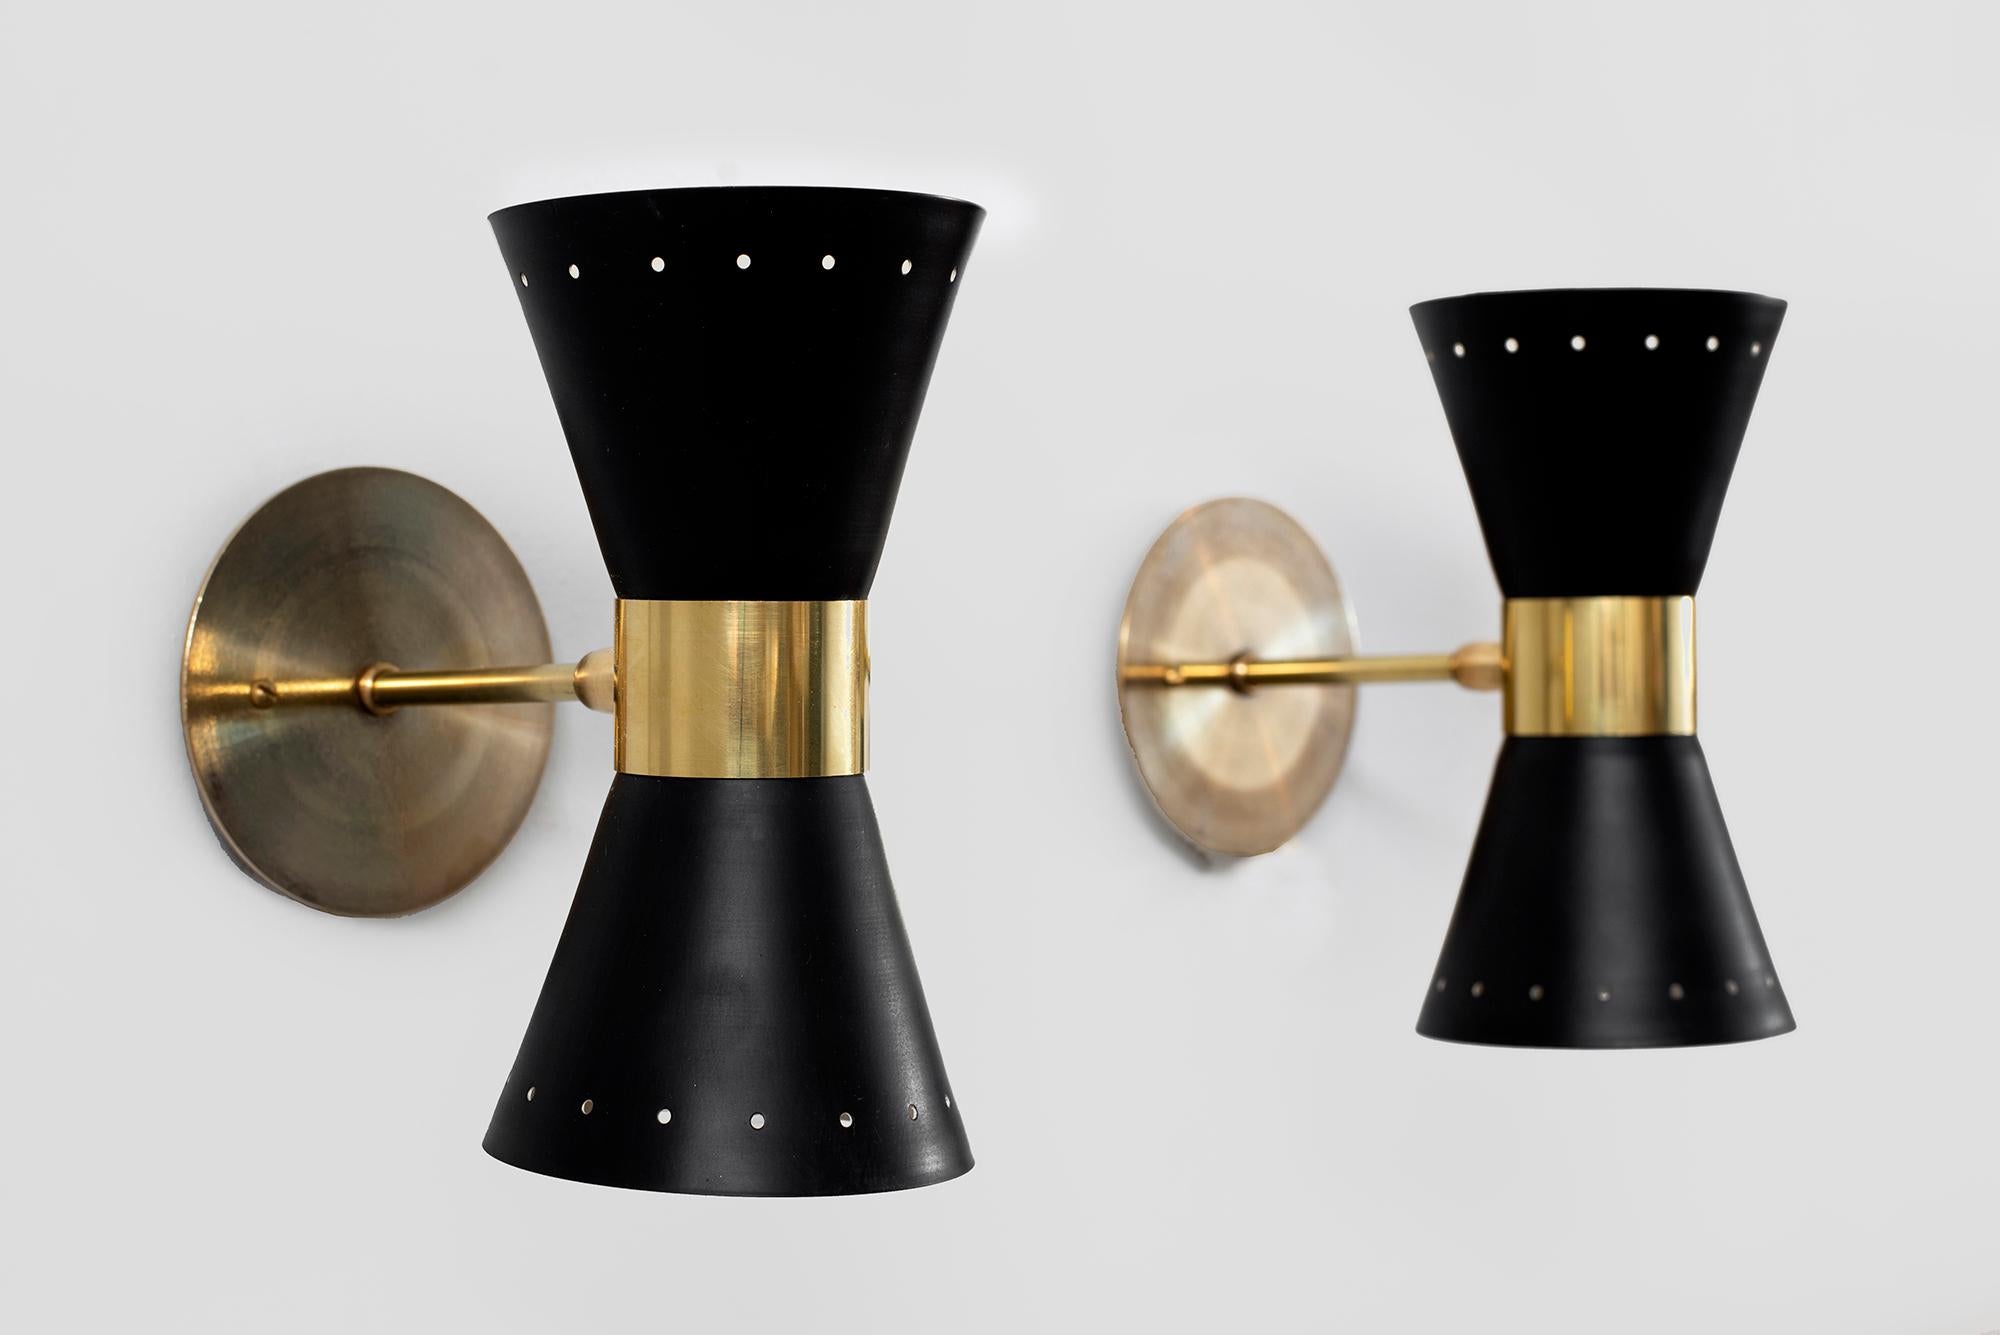 Petite in scale - metal sconces in the style of Stilnovo, newly produced in Italy. 
Black perforated metal shade with brass detailing and back-plate.
Sconces shine both up and down light.
Wired to American standards.
 
Measures: W 4 3/4”
D 8